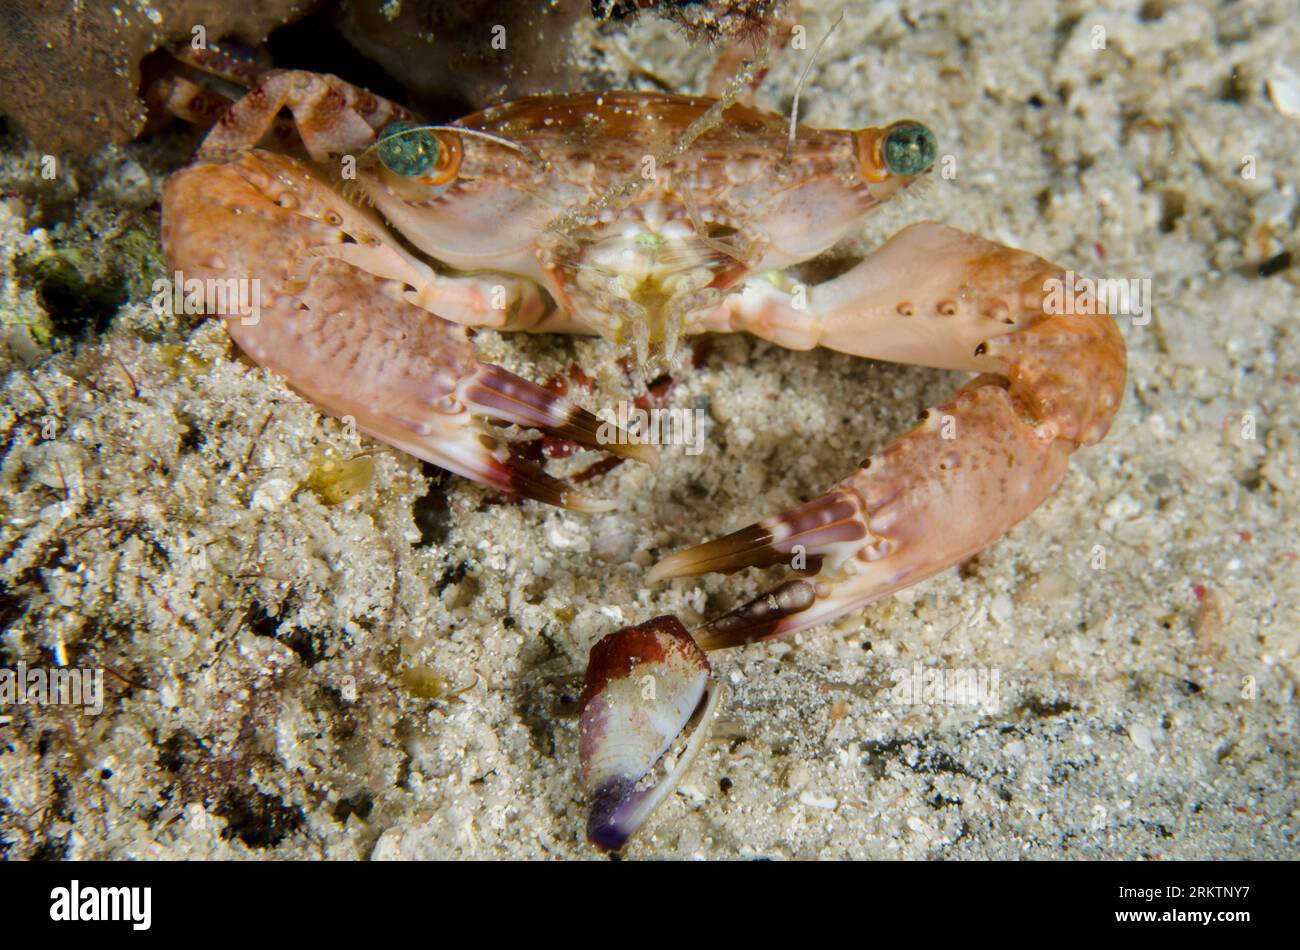 Swimming Crab, Charybdis sp, with Cone Shell, Conus sp, night dive, Sakokreng dive site, Dampier Strait, Raja Ampat, West Papua, Indonesia Stock Photo